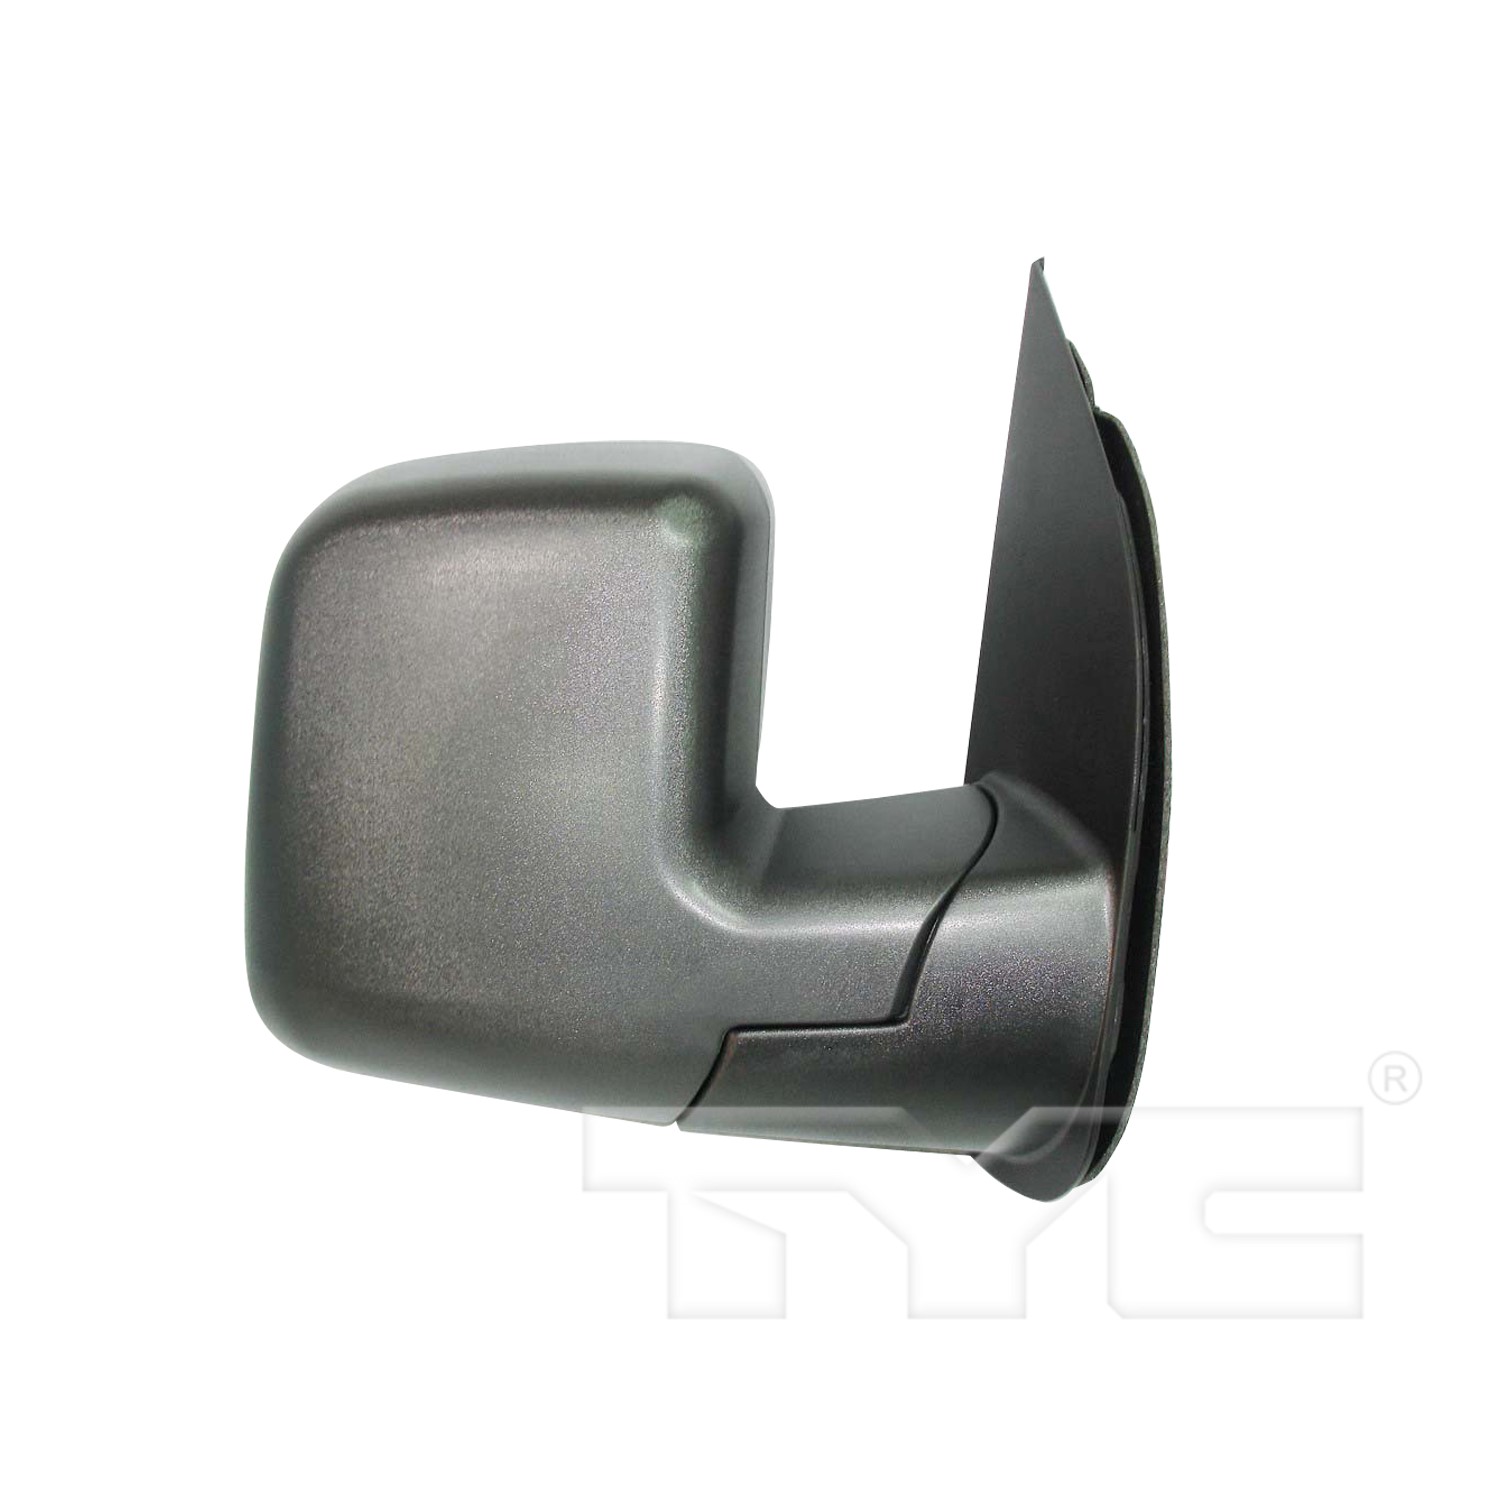 Aftermarket MIRRORS for FORD - E-550 SUPER DUTY, E-550 SUPER DUTY,03-03,RT Mirror outside rear view